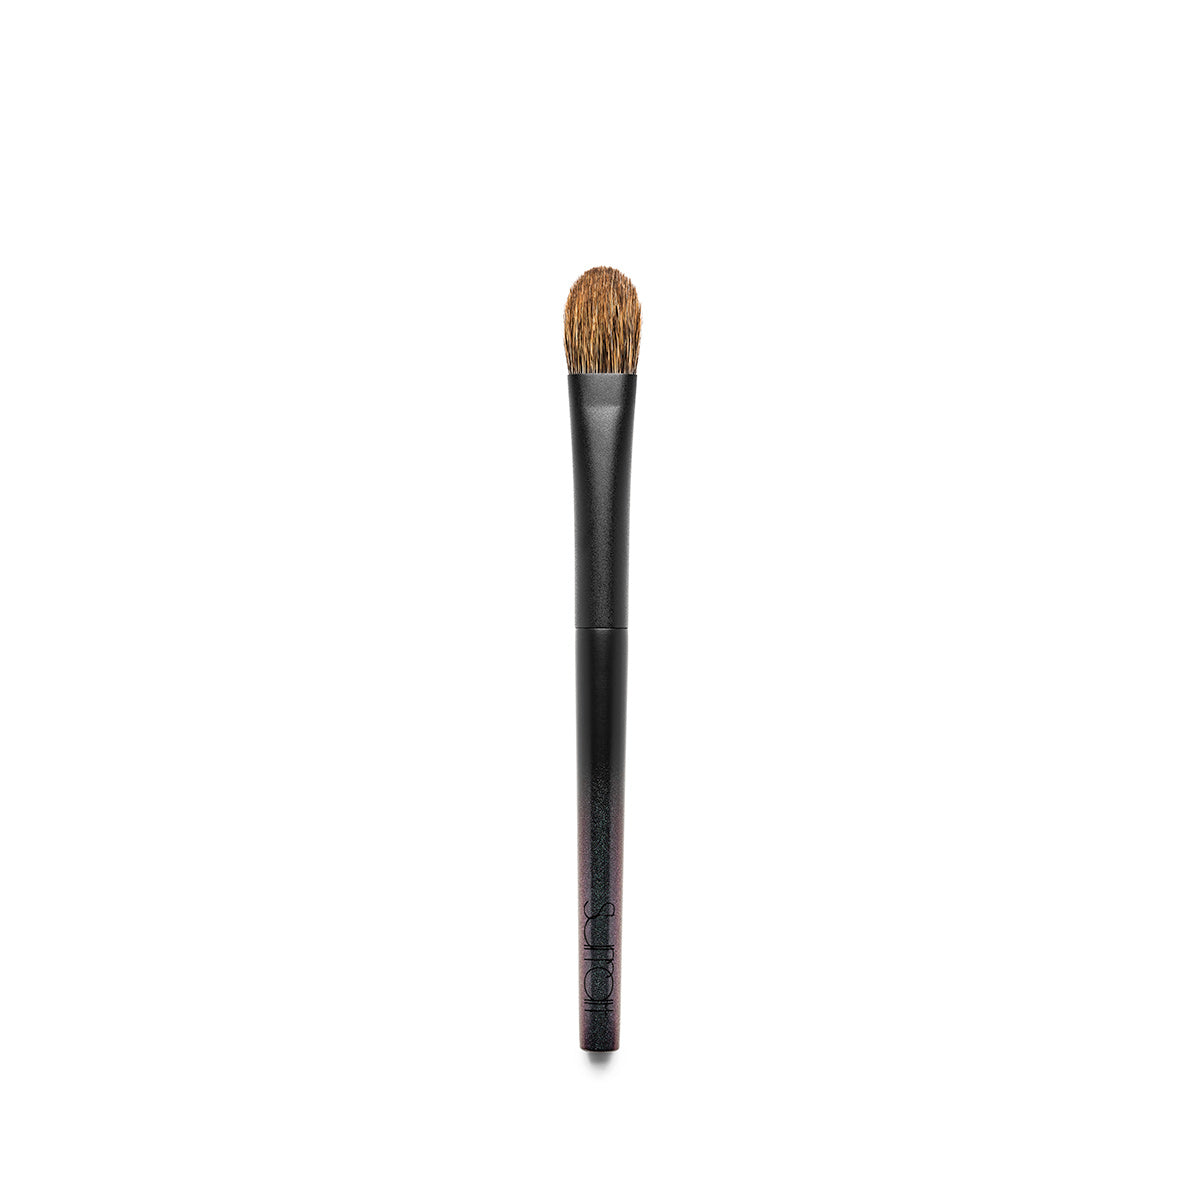 ultra-soft natural hair makeup brush for eyeshadow in size large